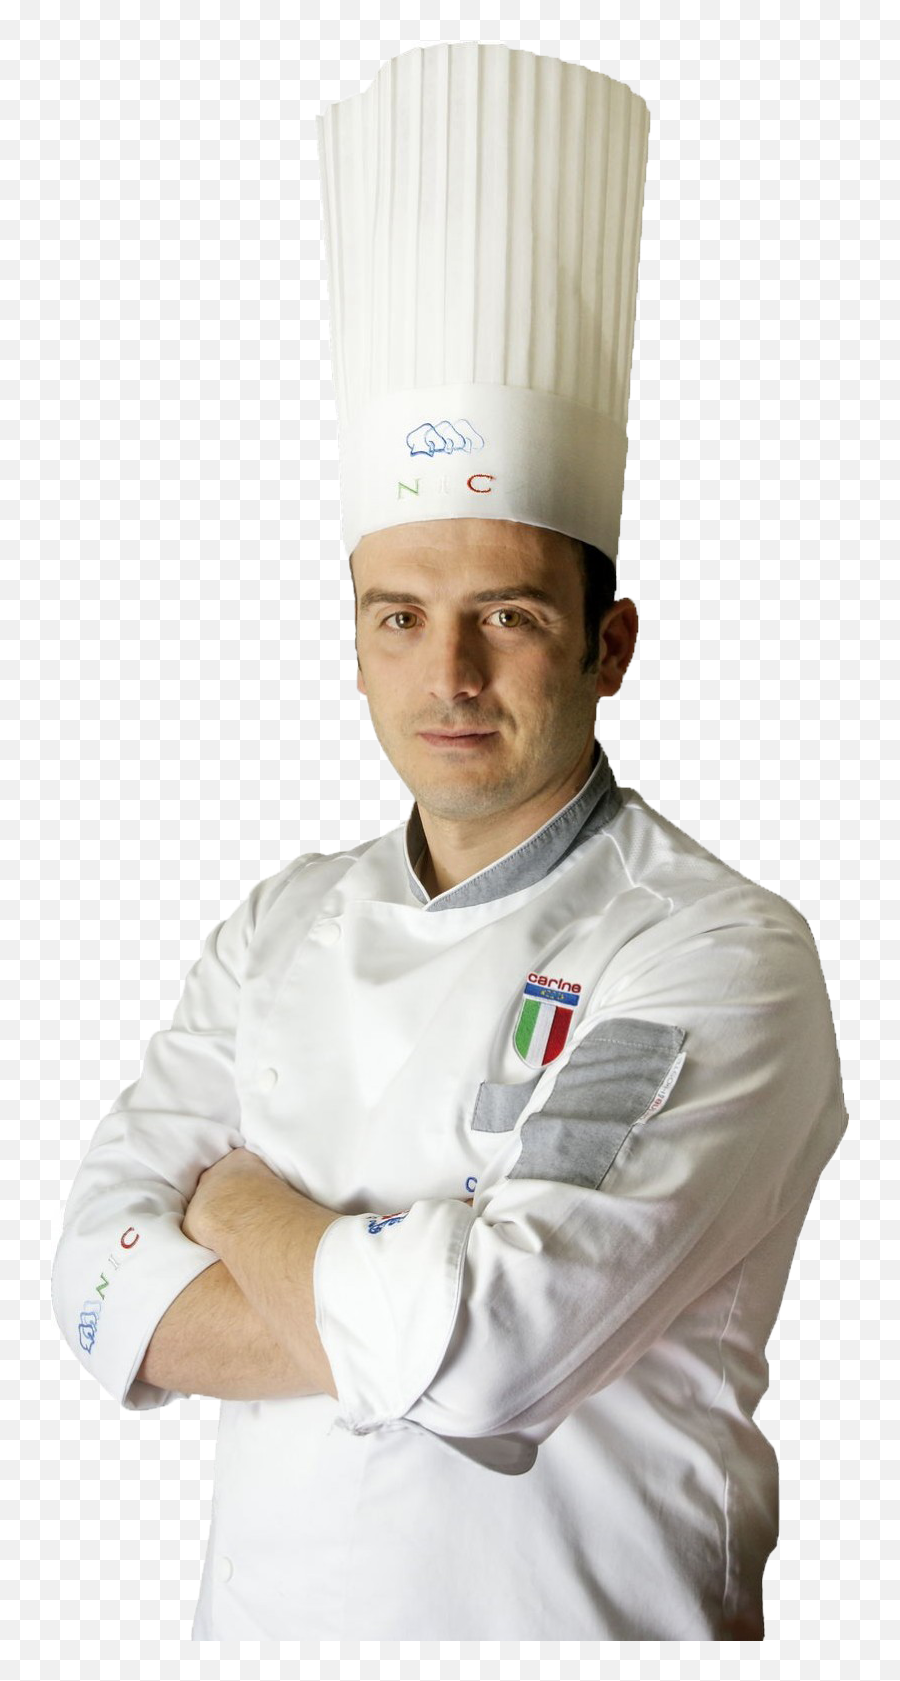 Chef Png Transparent Images Free Download